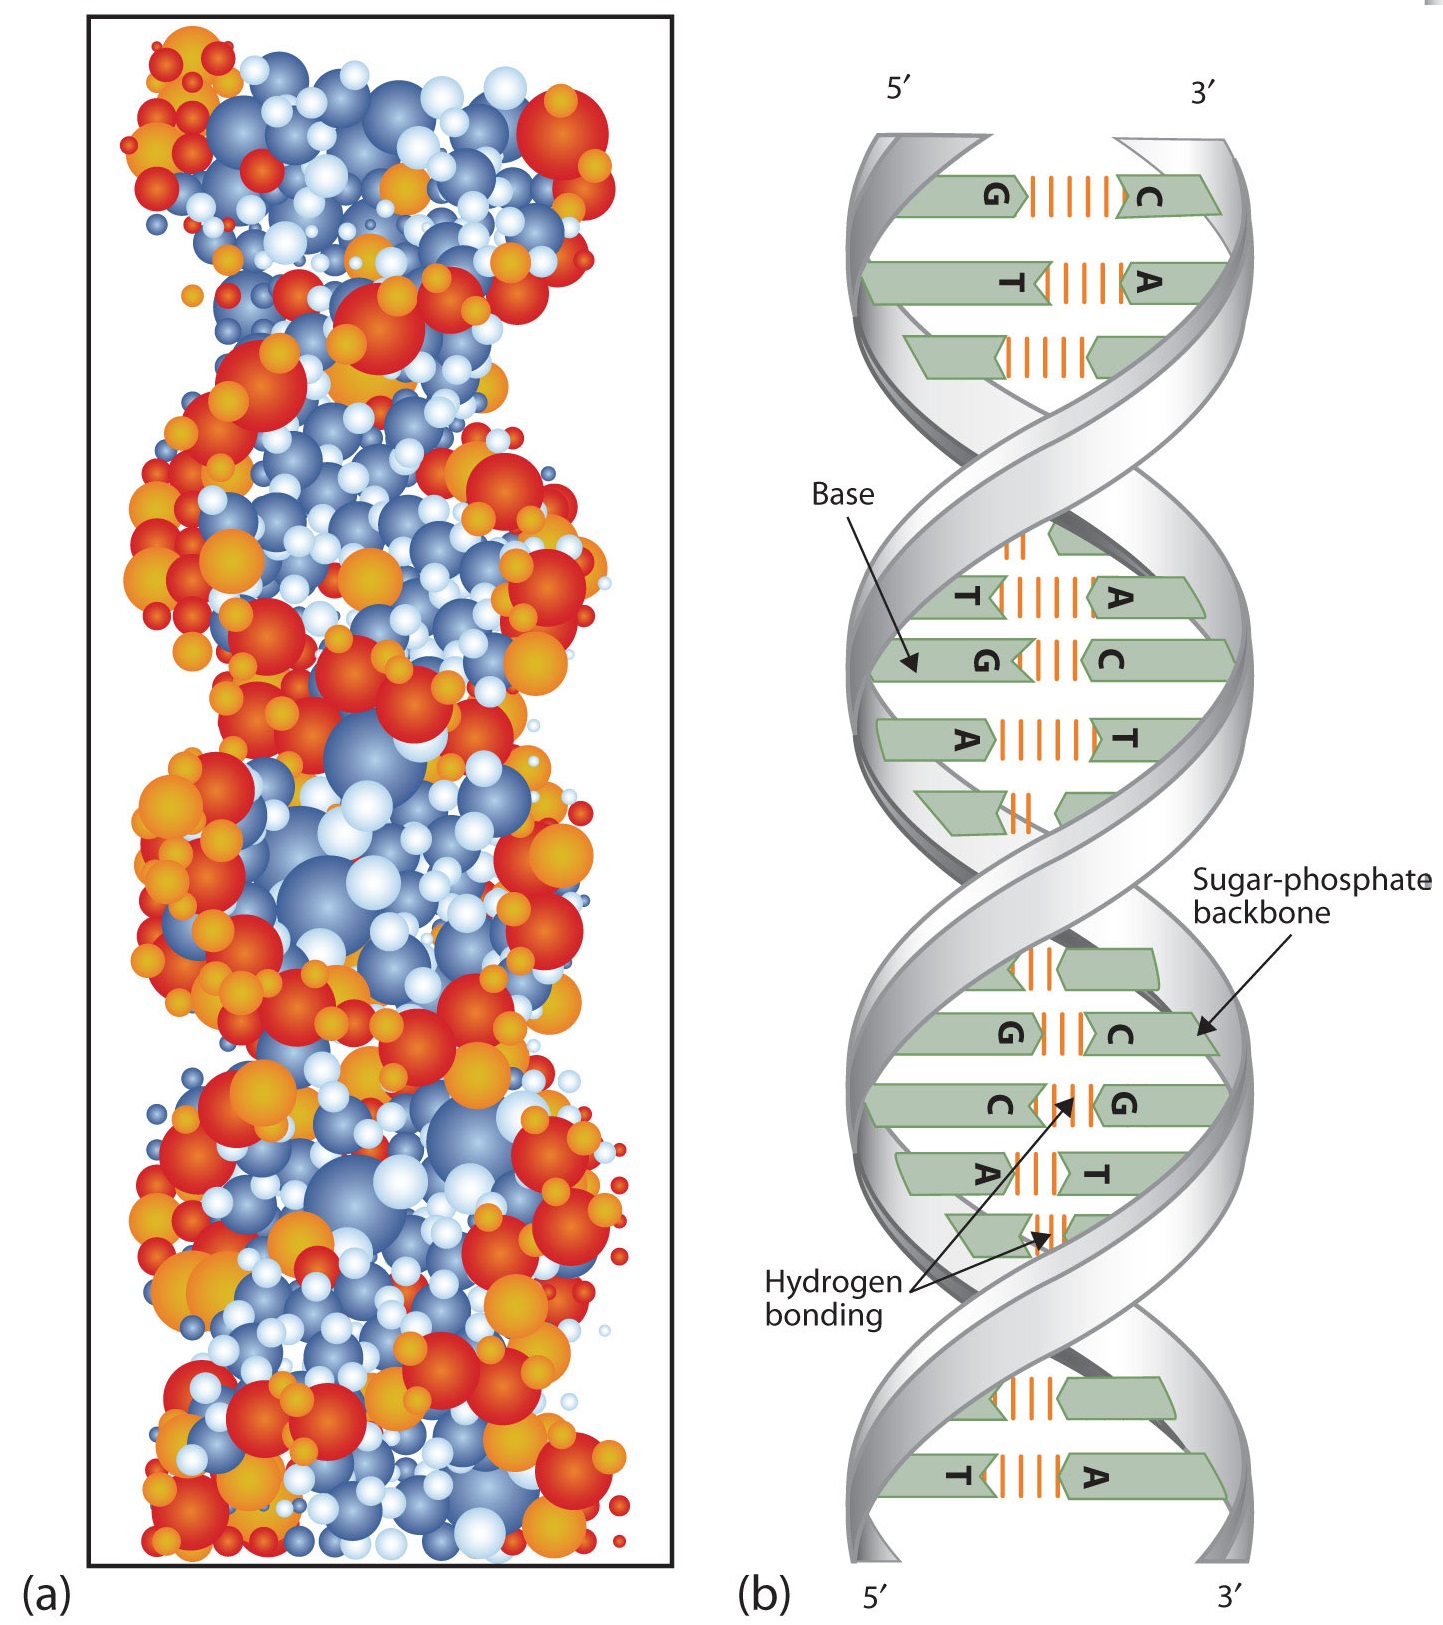 purines and pyrimidines in dna model